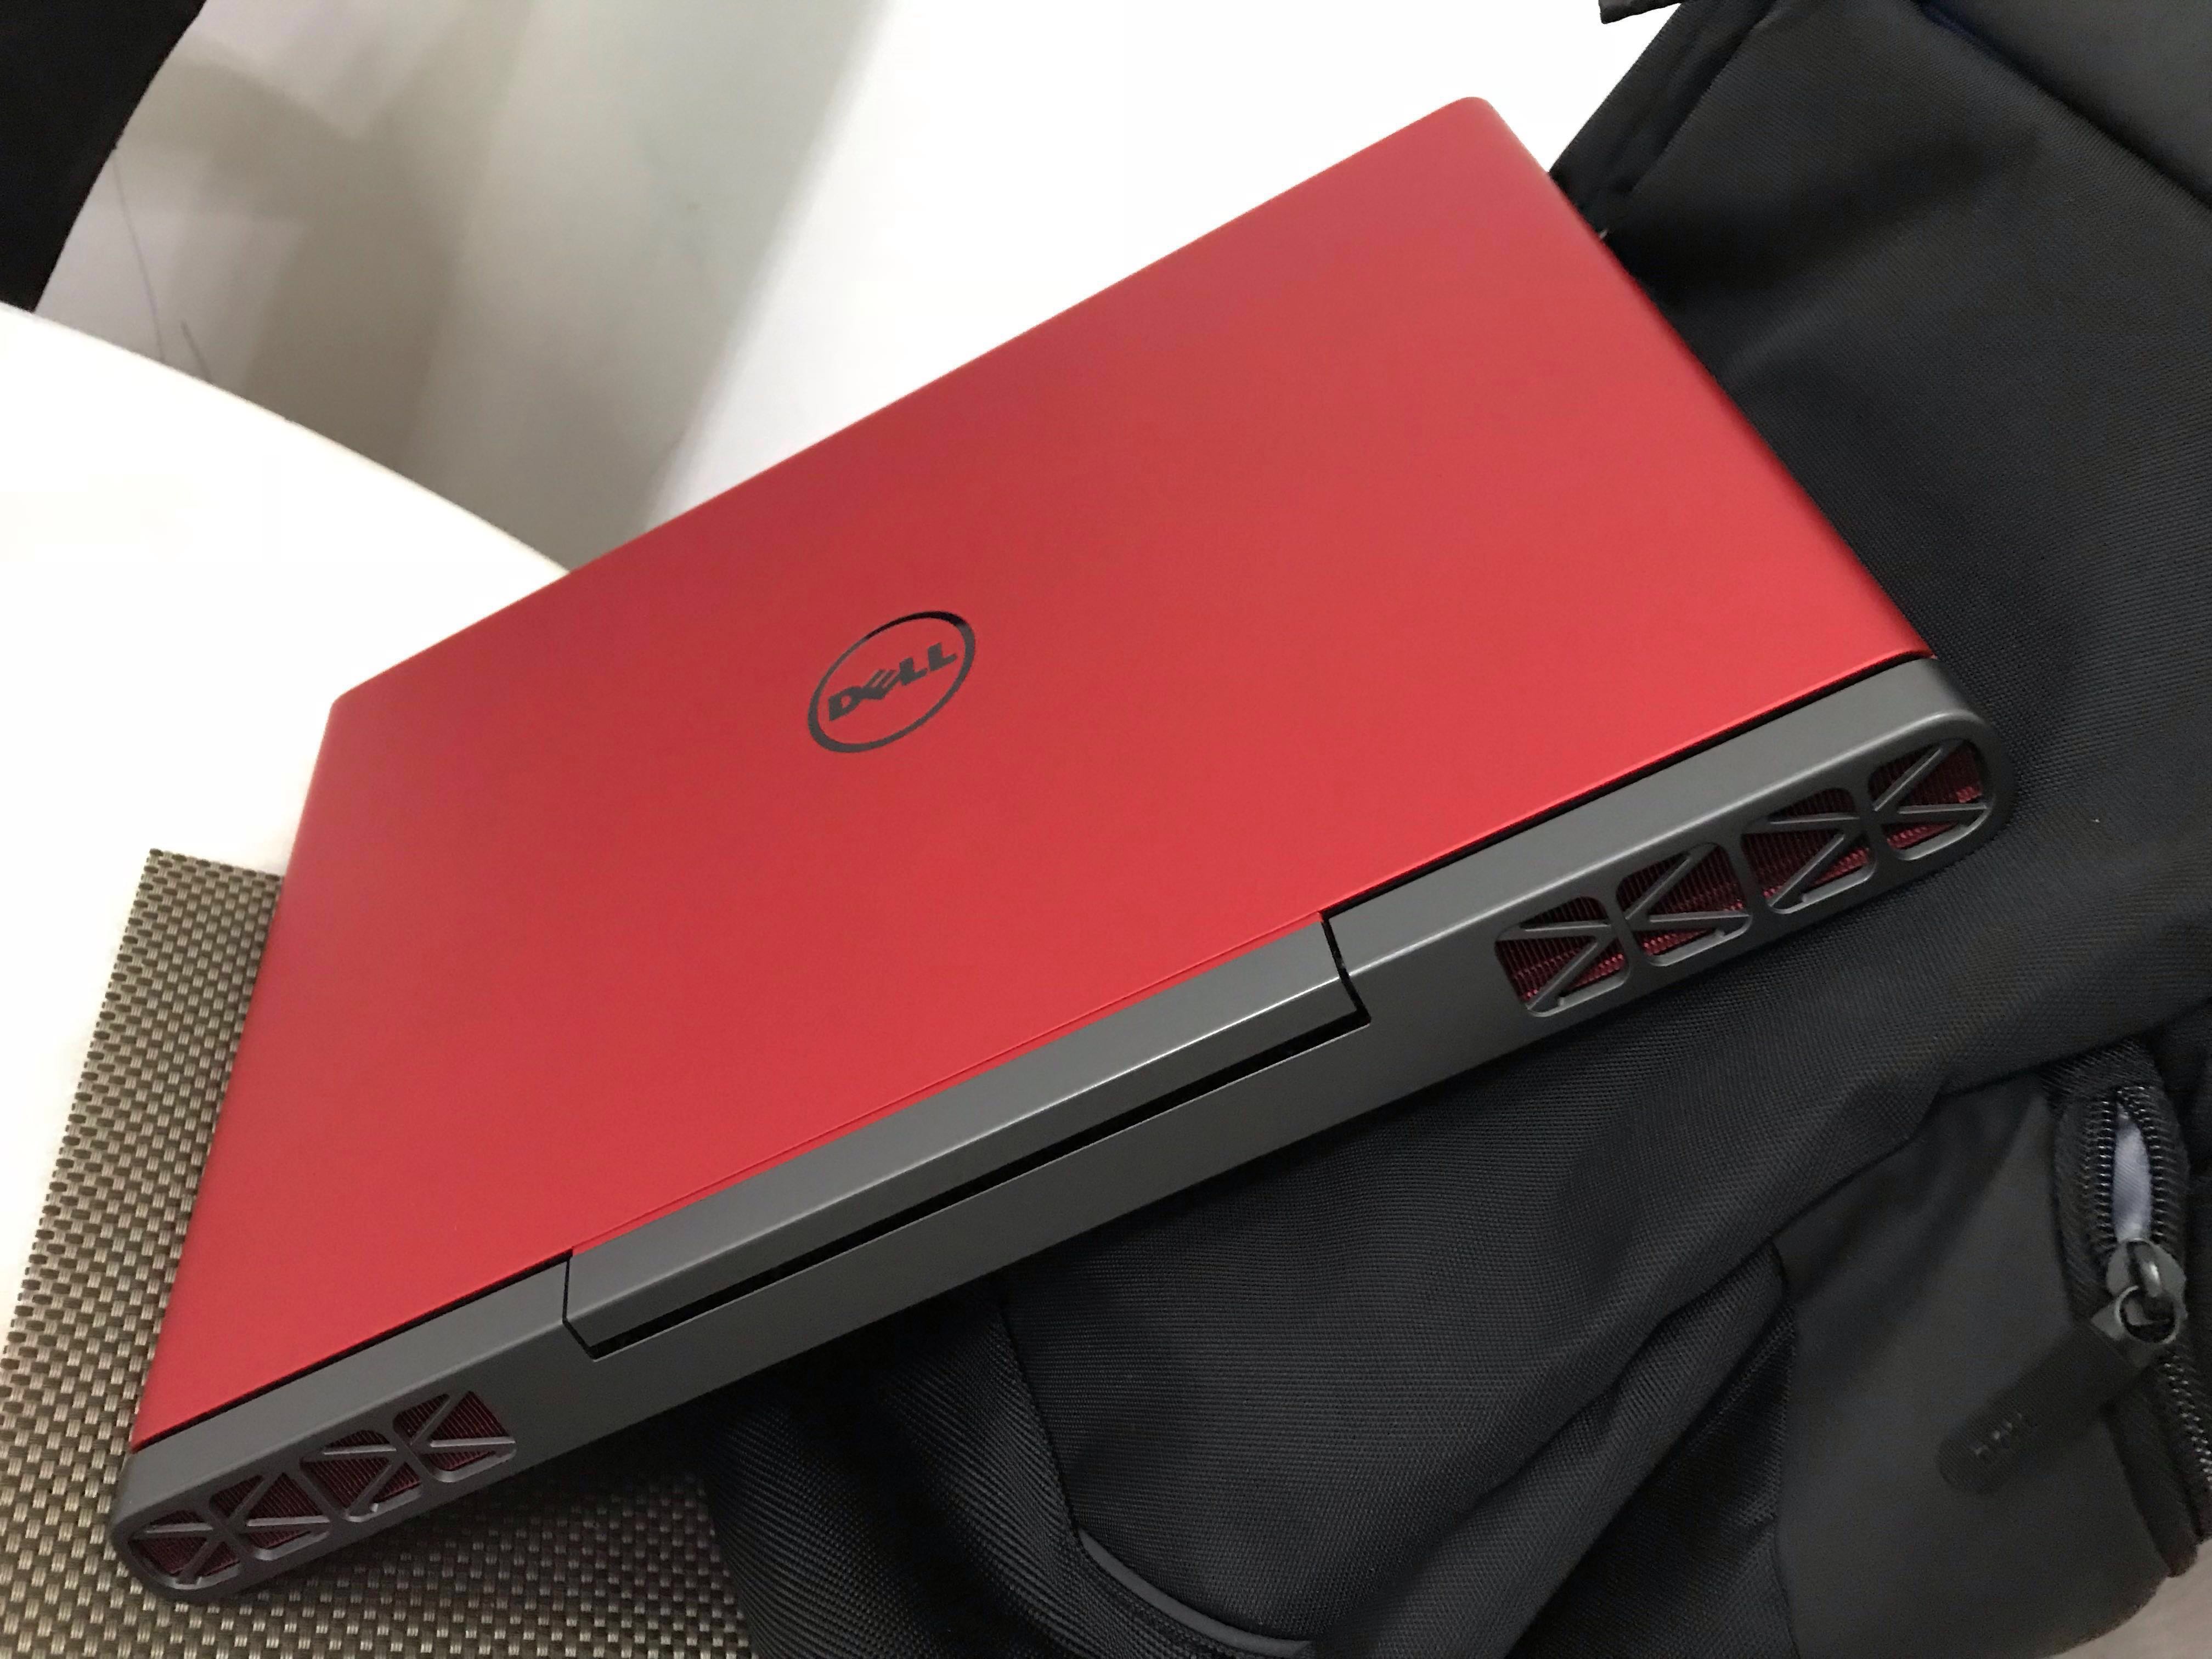 Mint condition; DELL 7567 inspiron 15 7000 Gaming Laptop (RED